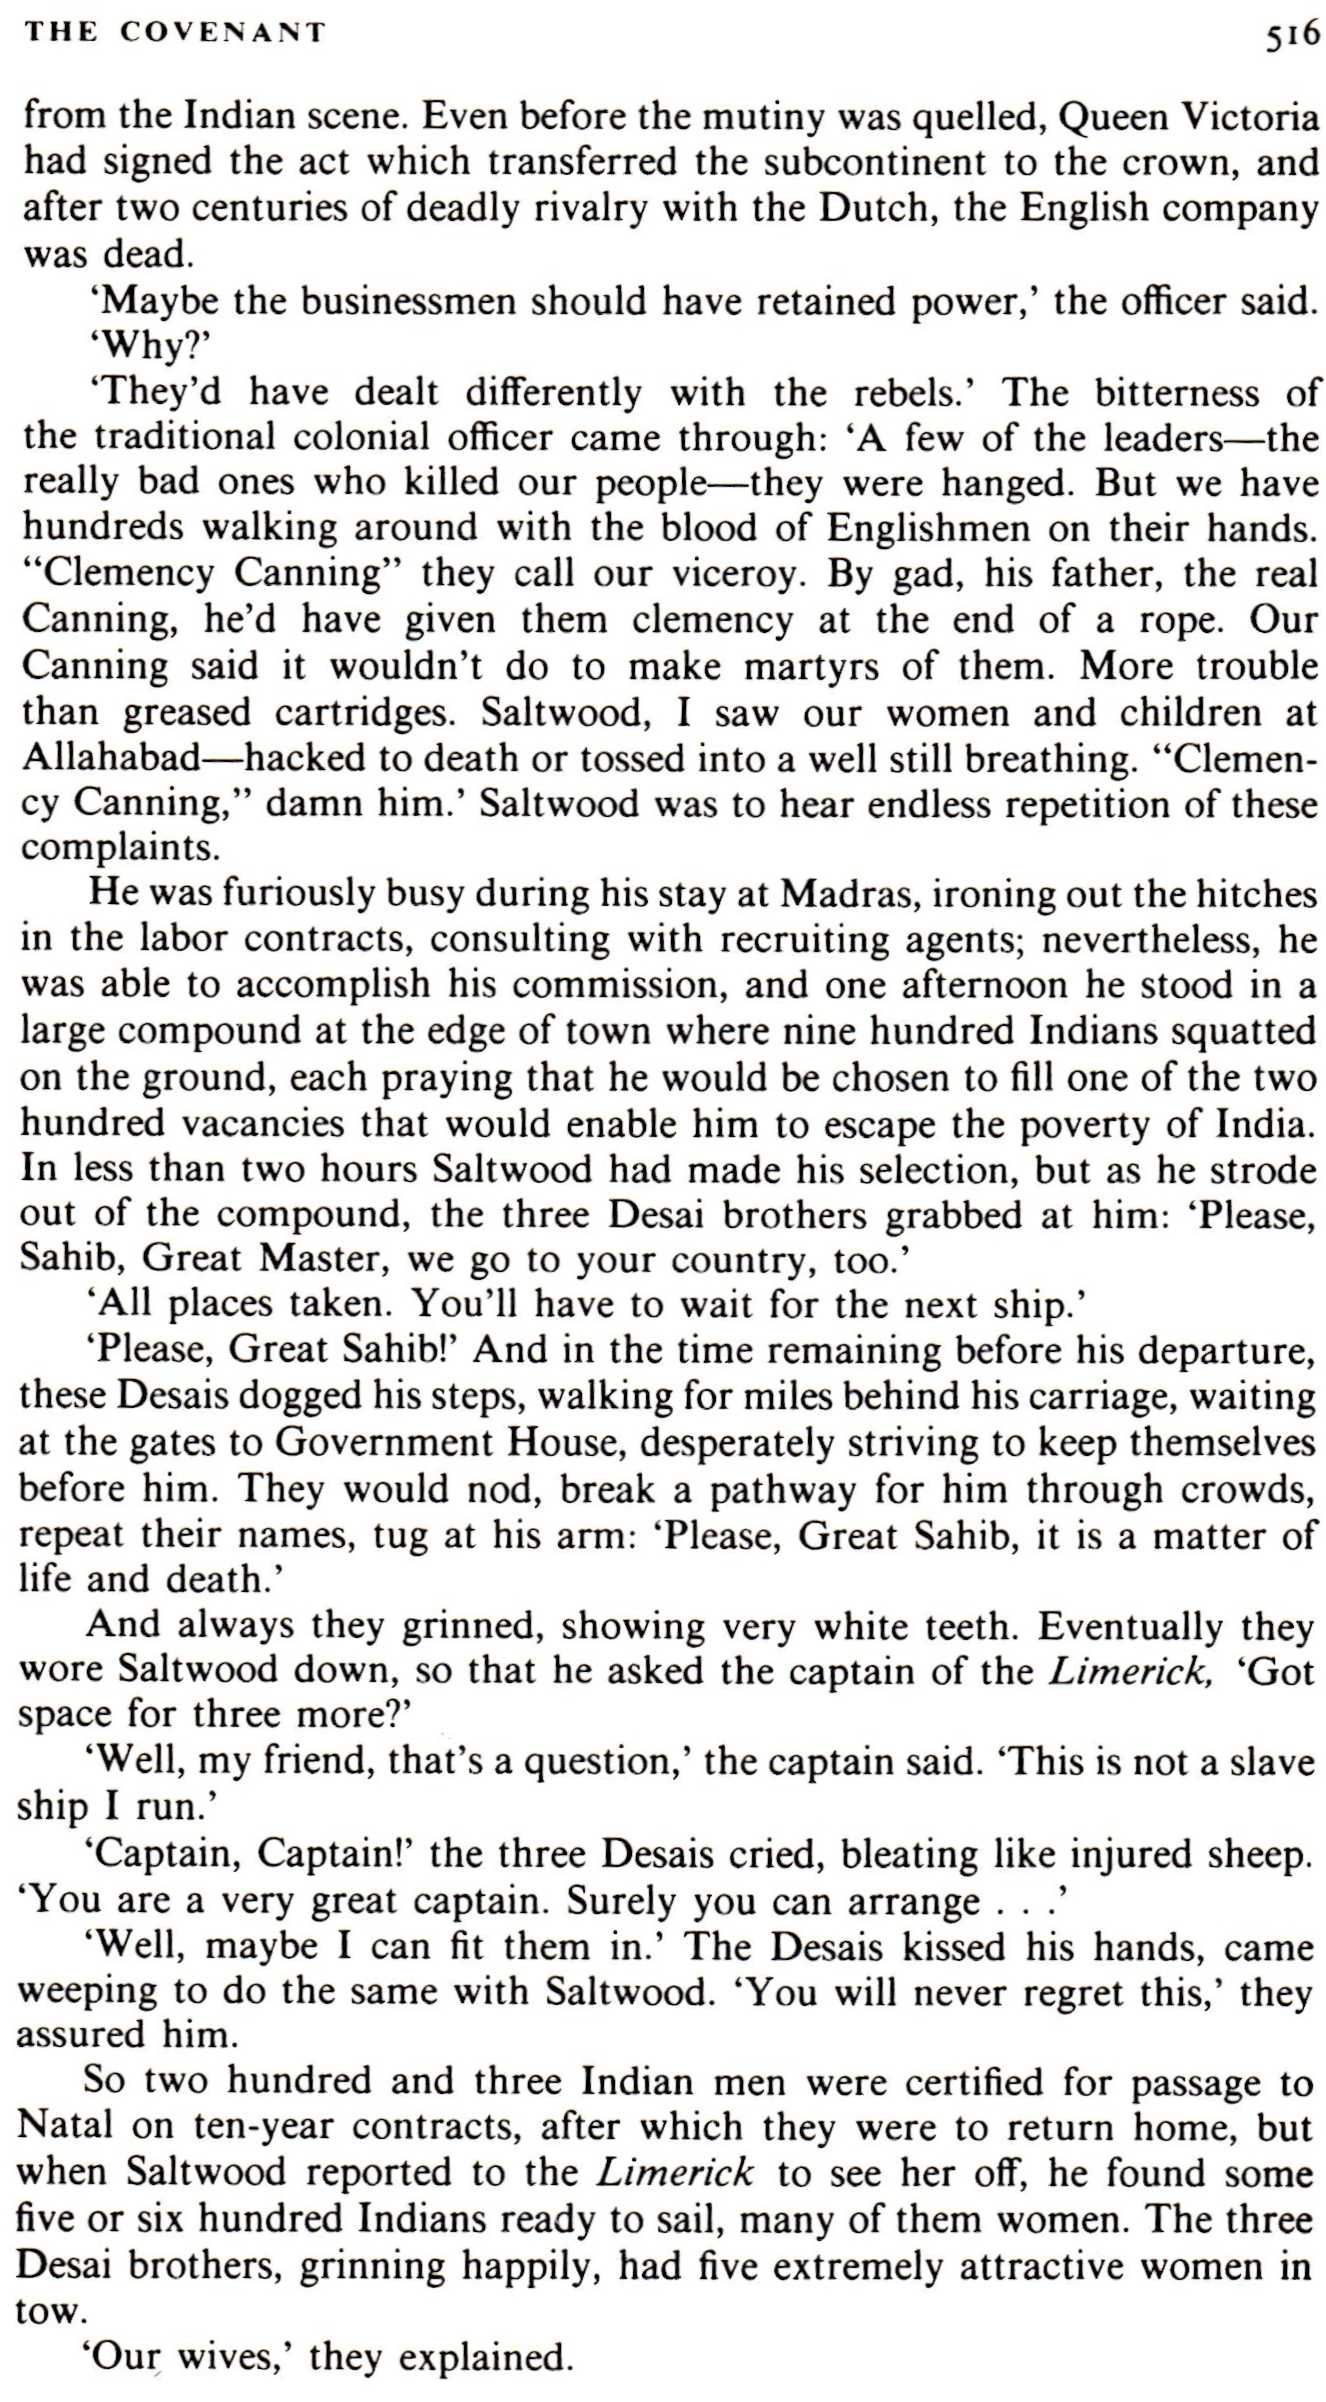 Excerpt from James A. Michener's The Covenant -  Desai family 2